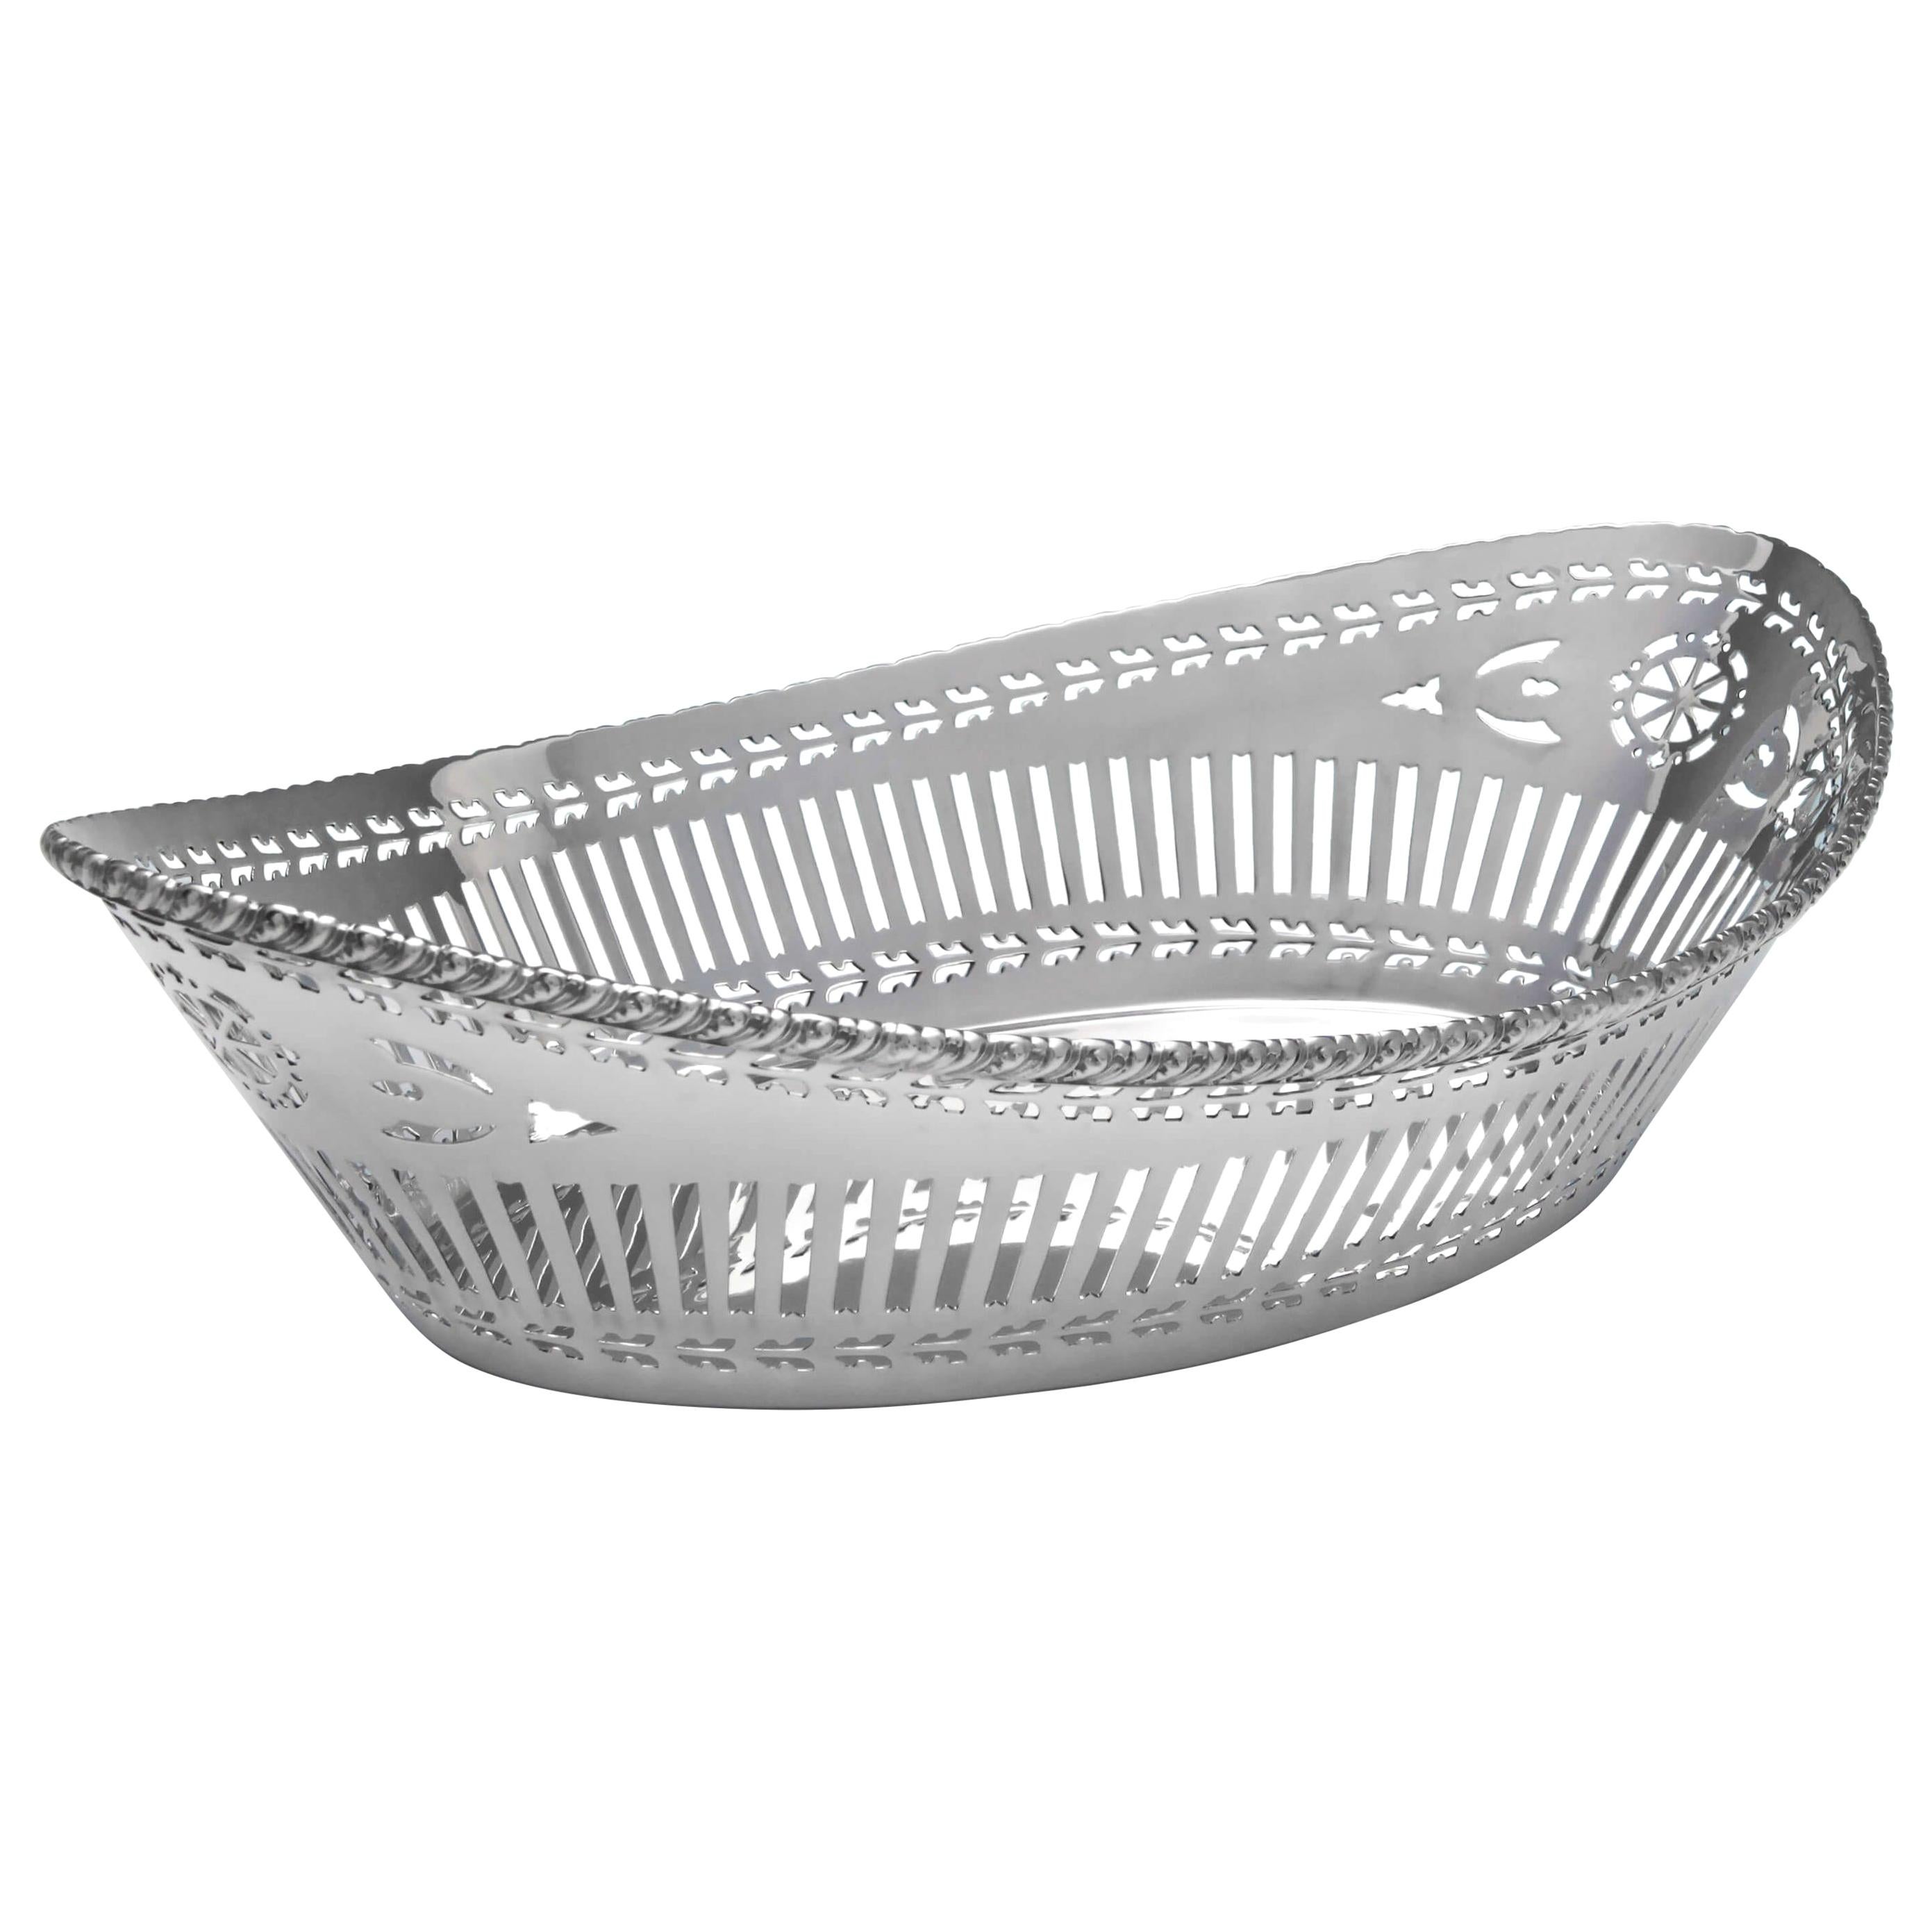 George V Pierced Sterling Silver Bread Dish Hallmarked in Chester in 1920